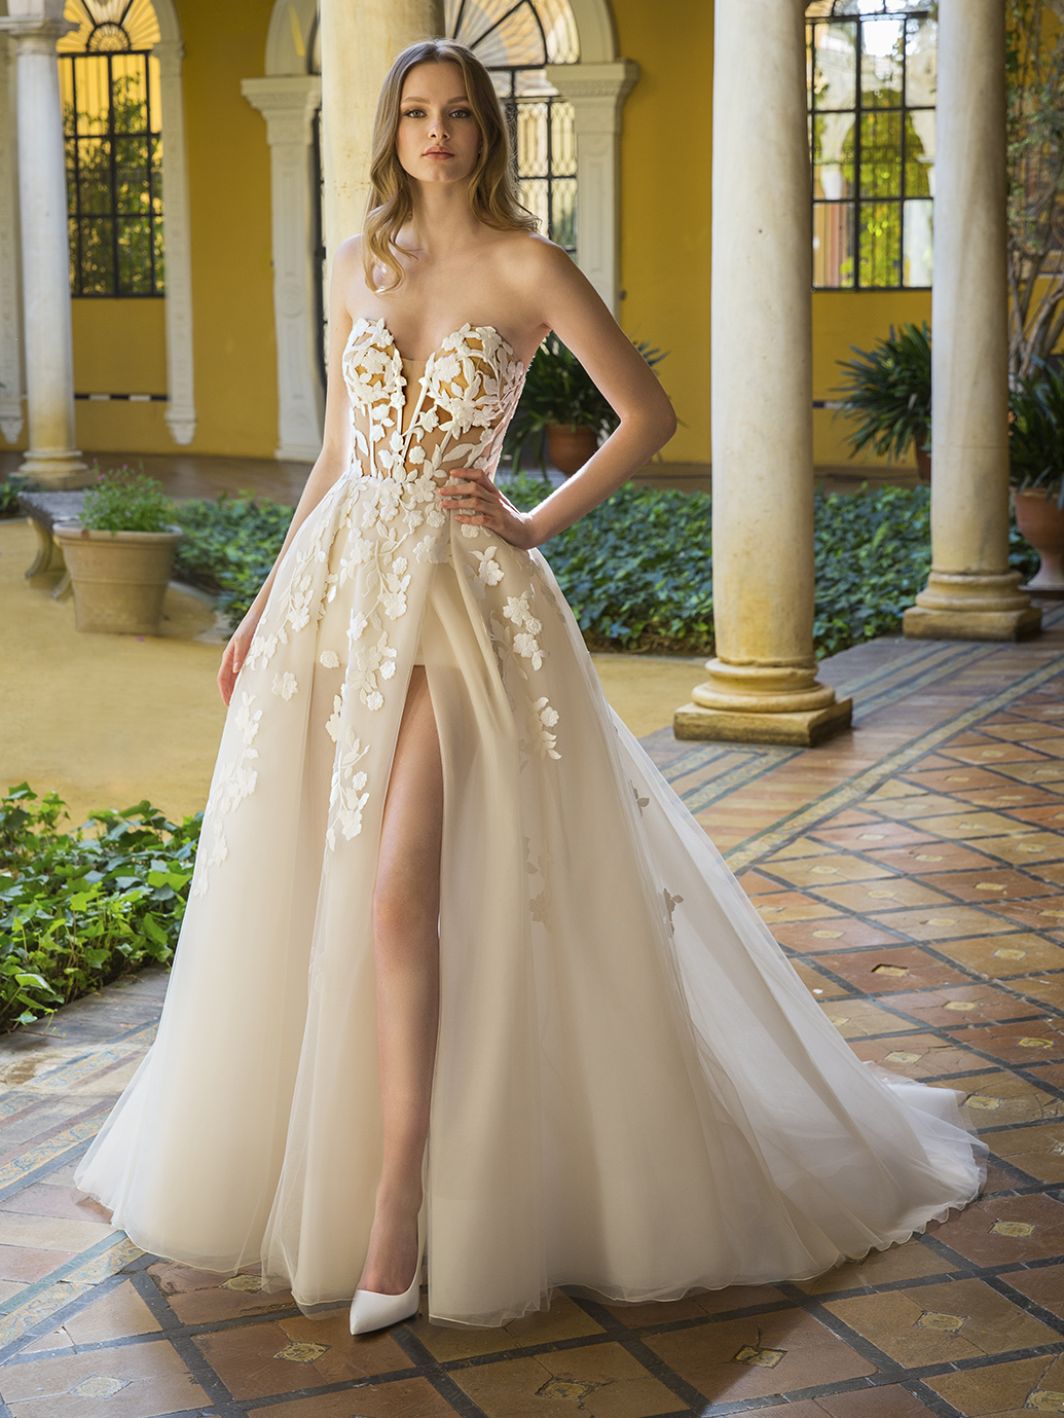 Modern Bridal Dress With High Slit Patience by Enzoani at K&B bridals bridal shop near baltimore maryland